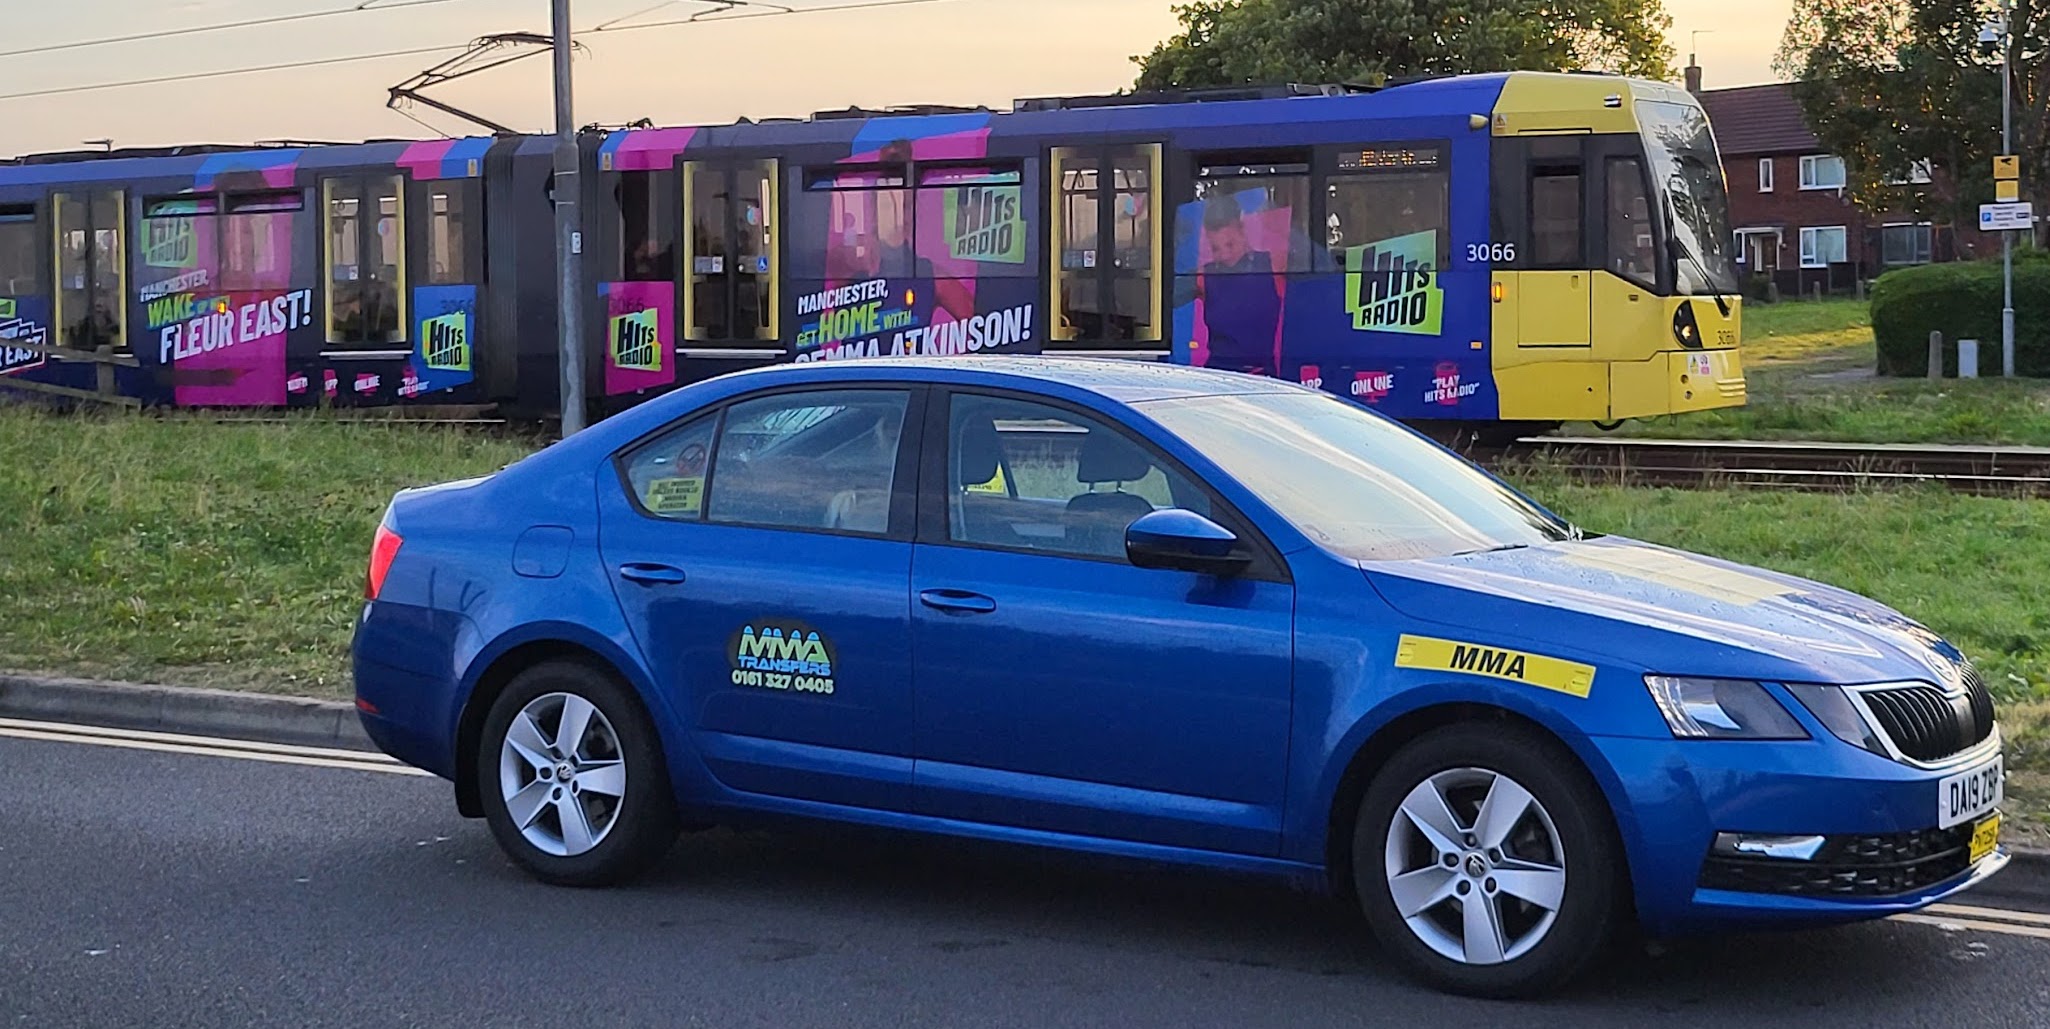 Taxis to Train Stations, Tram Stations, Seaports and Airports from Hull